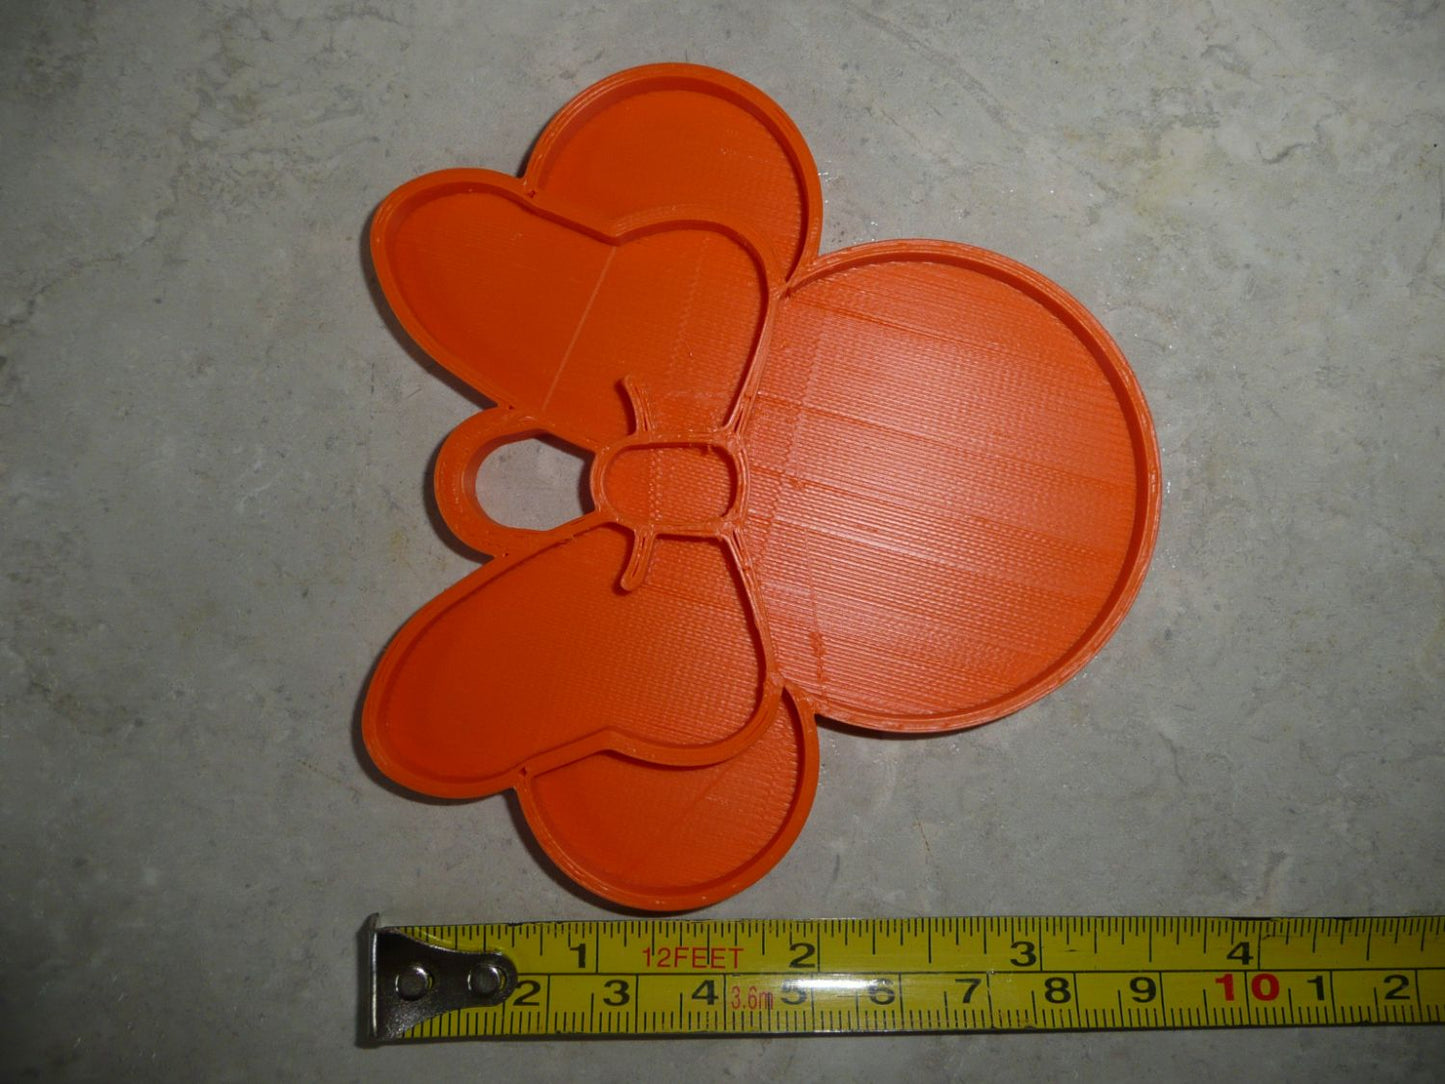 Minnie Mouse Face Ears Shape Orange Christmas Ornament Made in USA PR4880